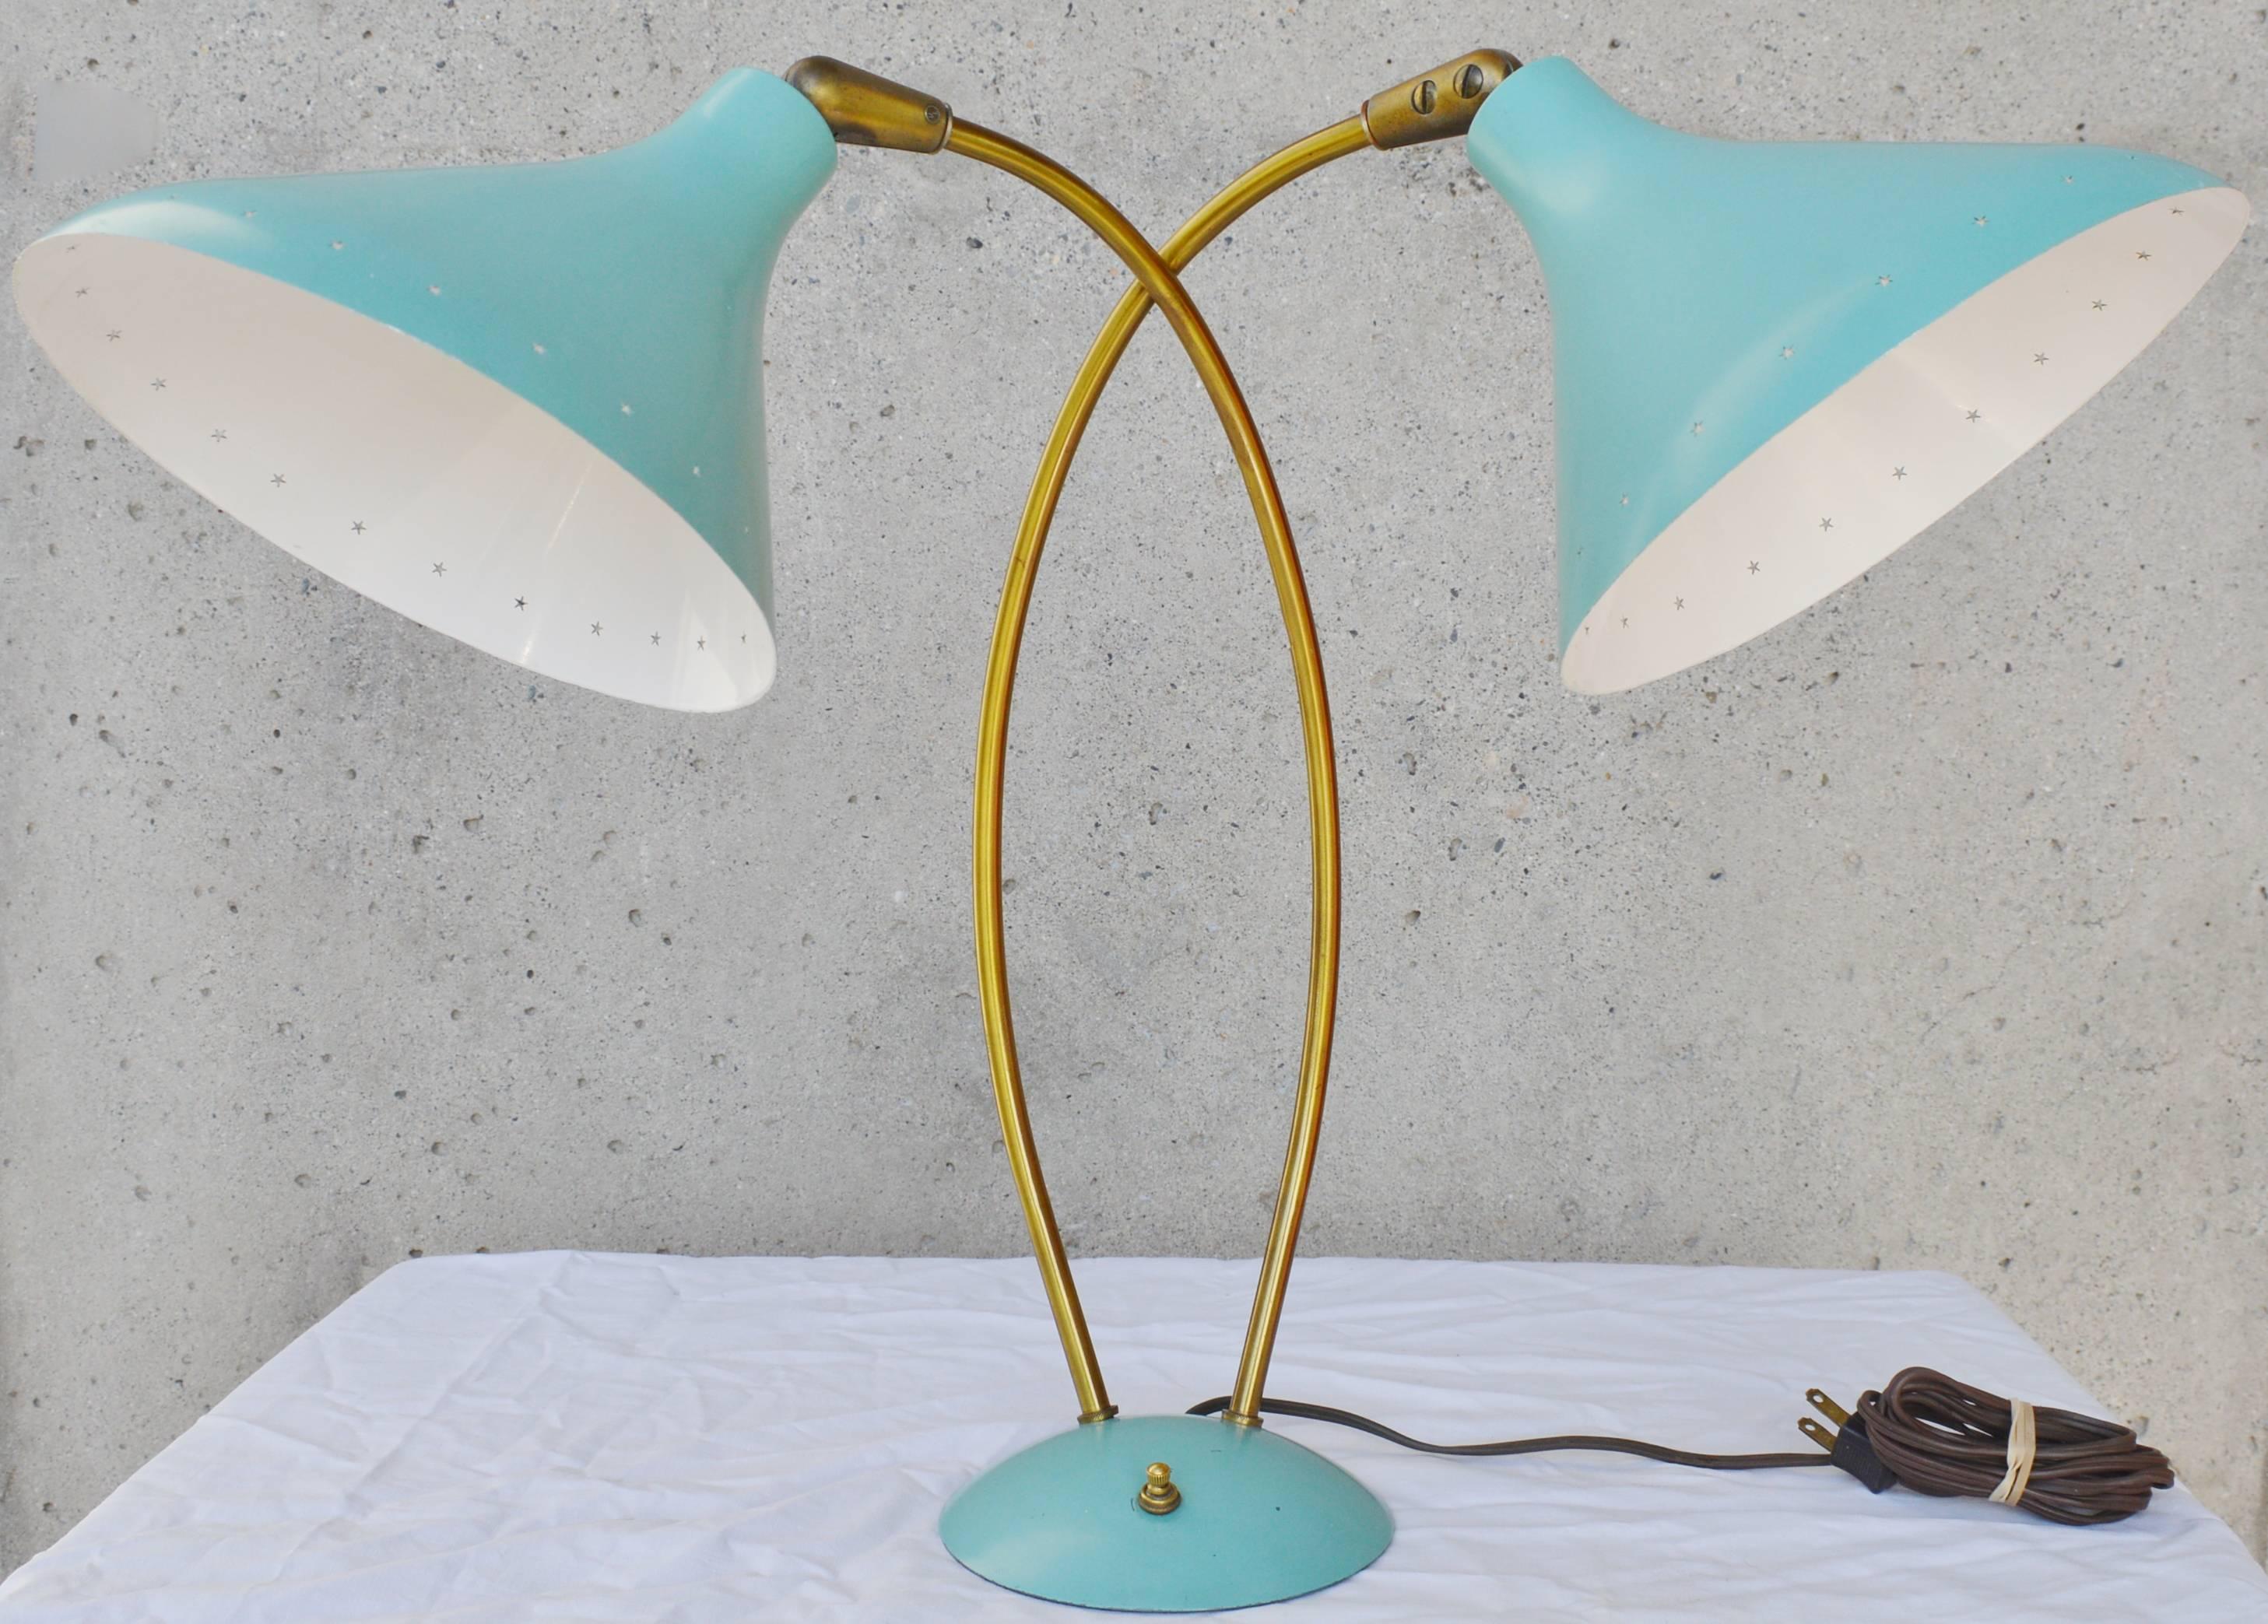 This stunning vintage Italian sky blue metal and brass lamp is certainly in the style of Stilnovo, with its bell shaped metal shades and Atomic Era styling. Note the star-shaped holes that circle the shades, the cross necked brass stems, and the